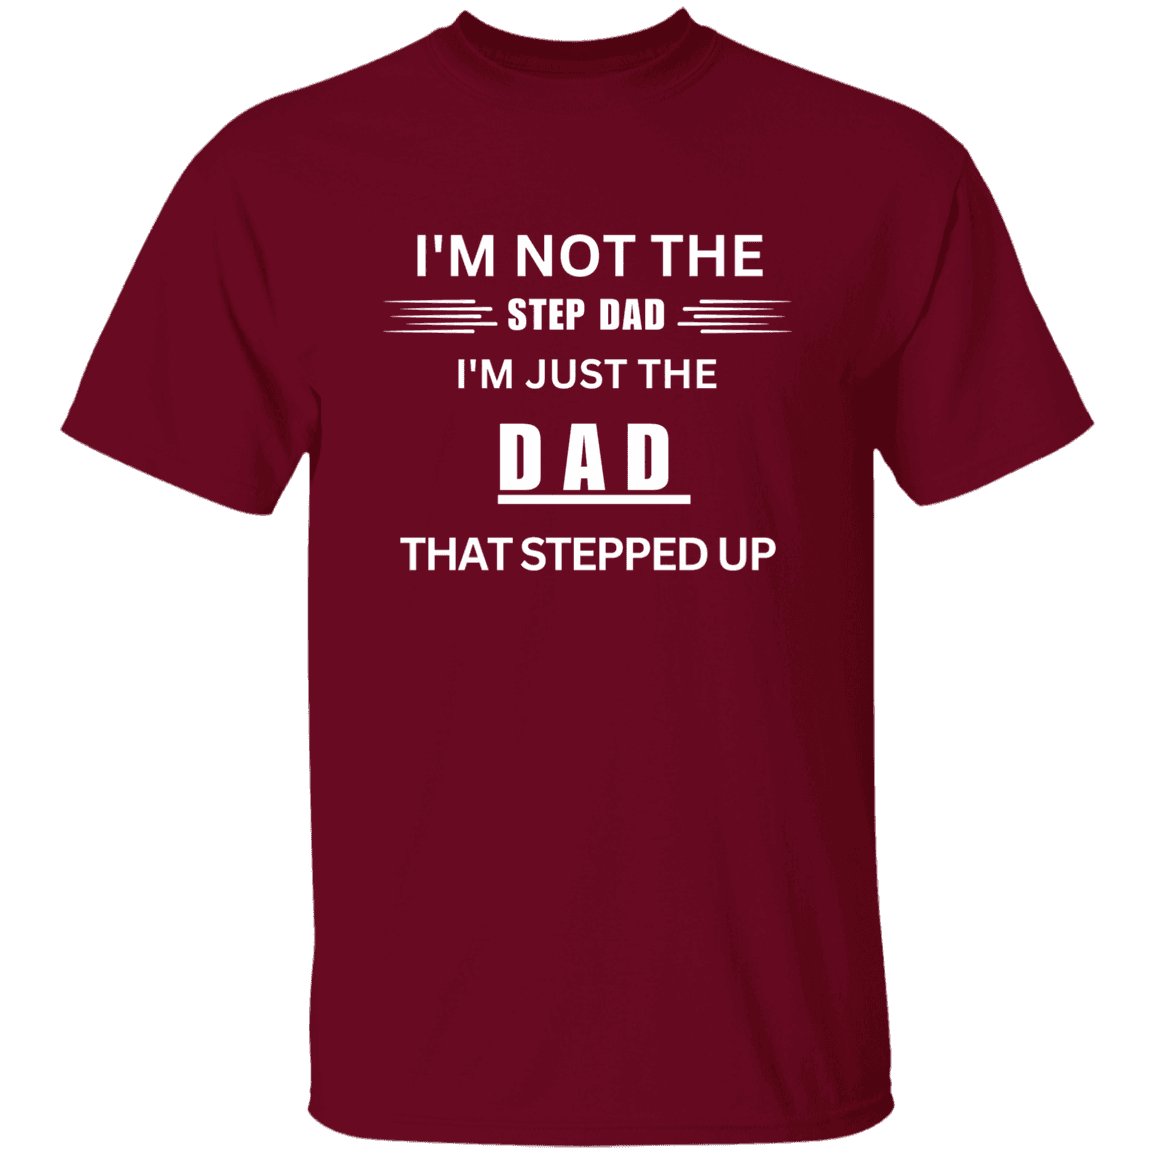 Front of the garnet red Stepped Up Dad t-shirt. Material is heavyweight 100% cotton in a classic unisex t-shirt style. Printed in white letters on the chest is the phrase: "I'm not the Step Dad, I'm just the DAD that stepped up"